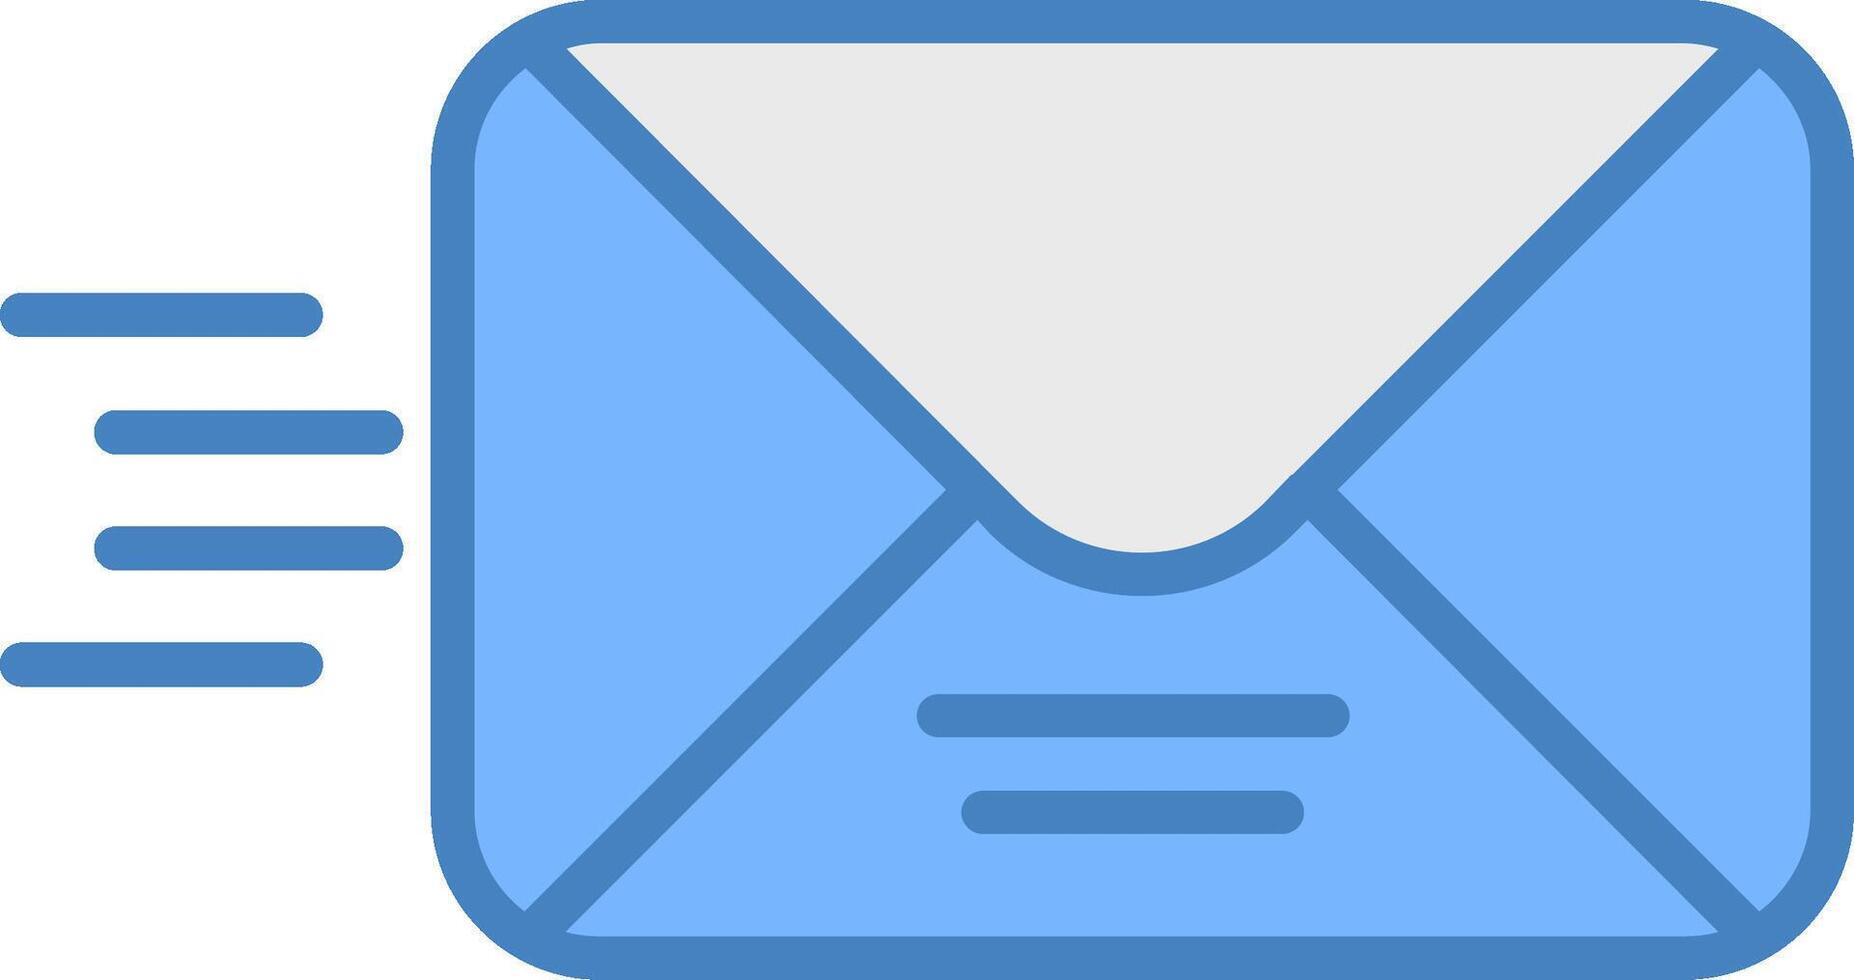 Email Line Filled Blue Icon vector